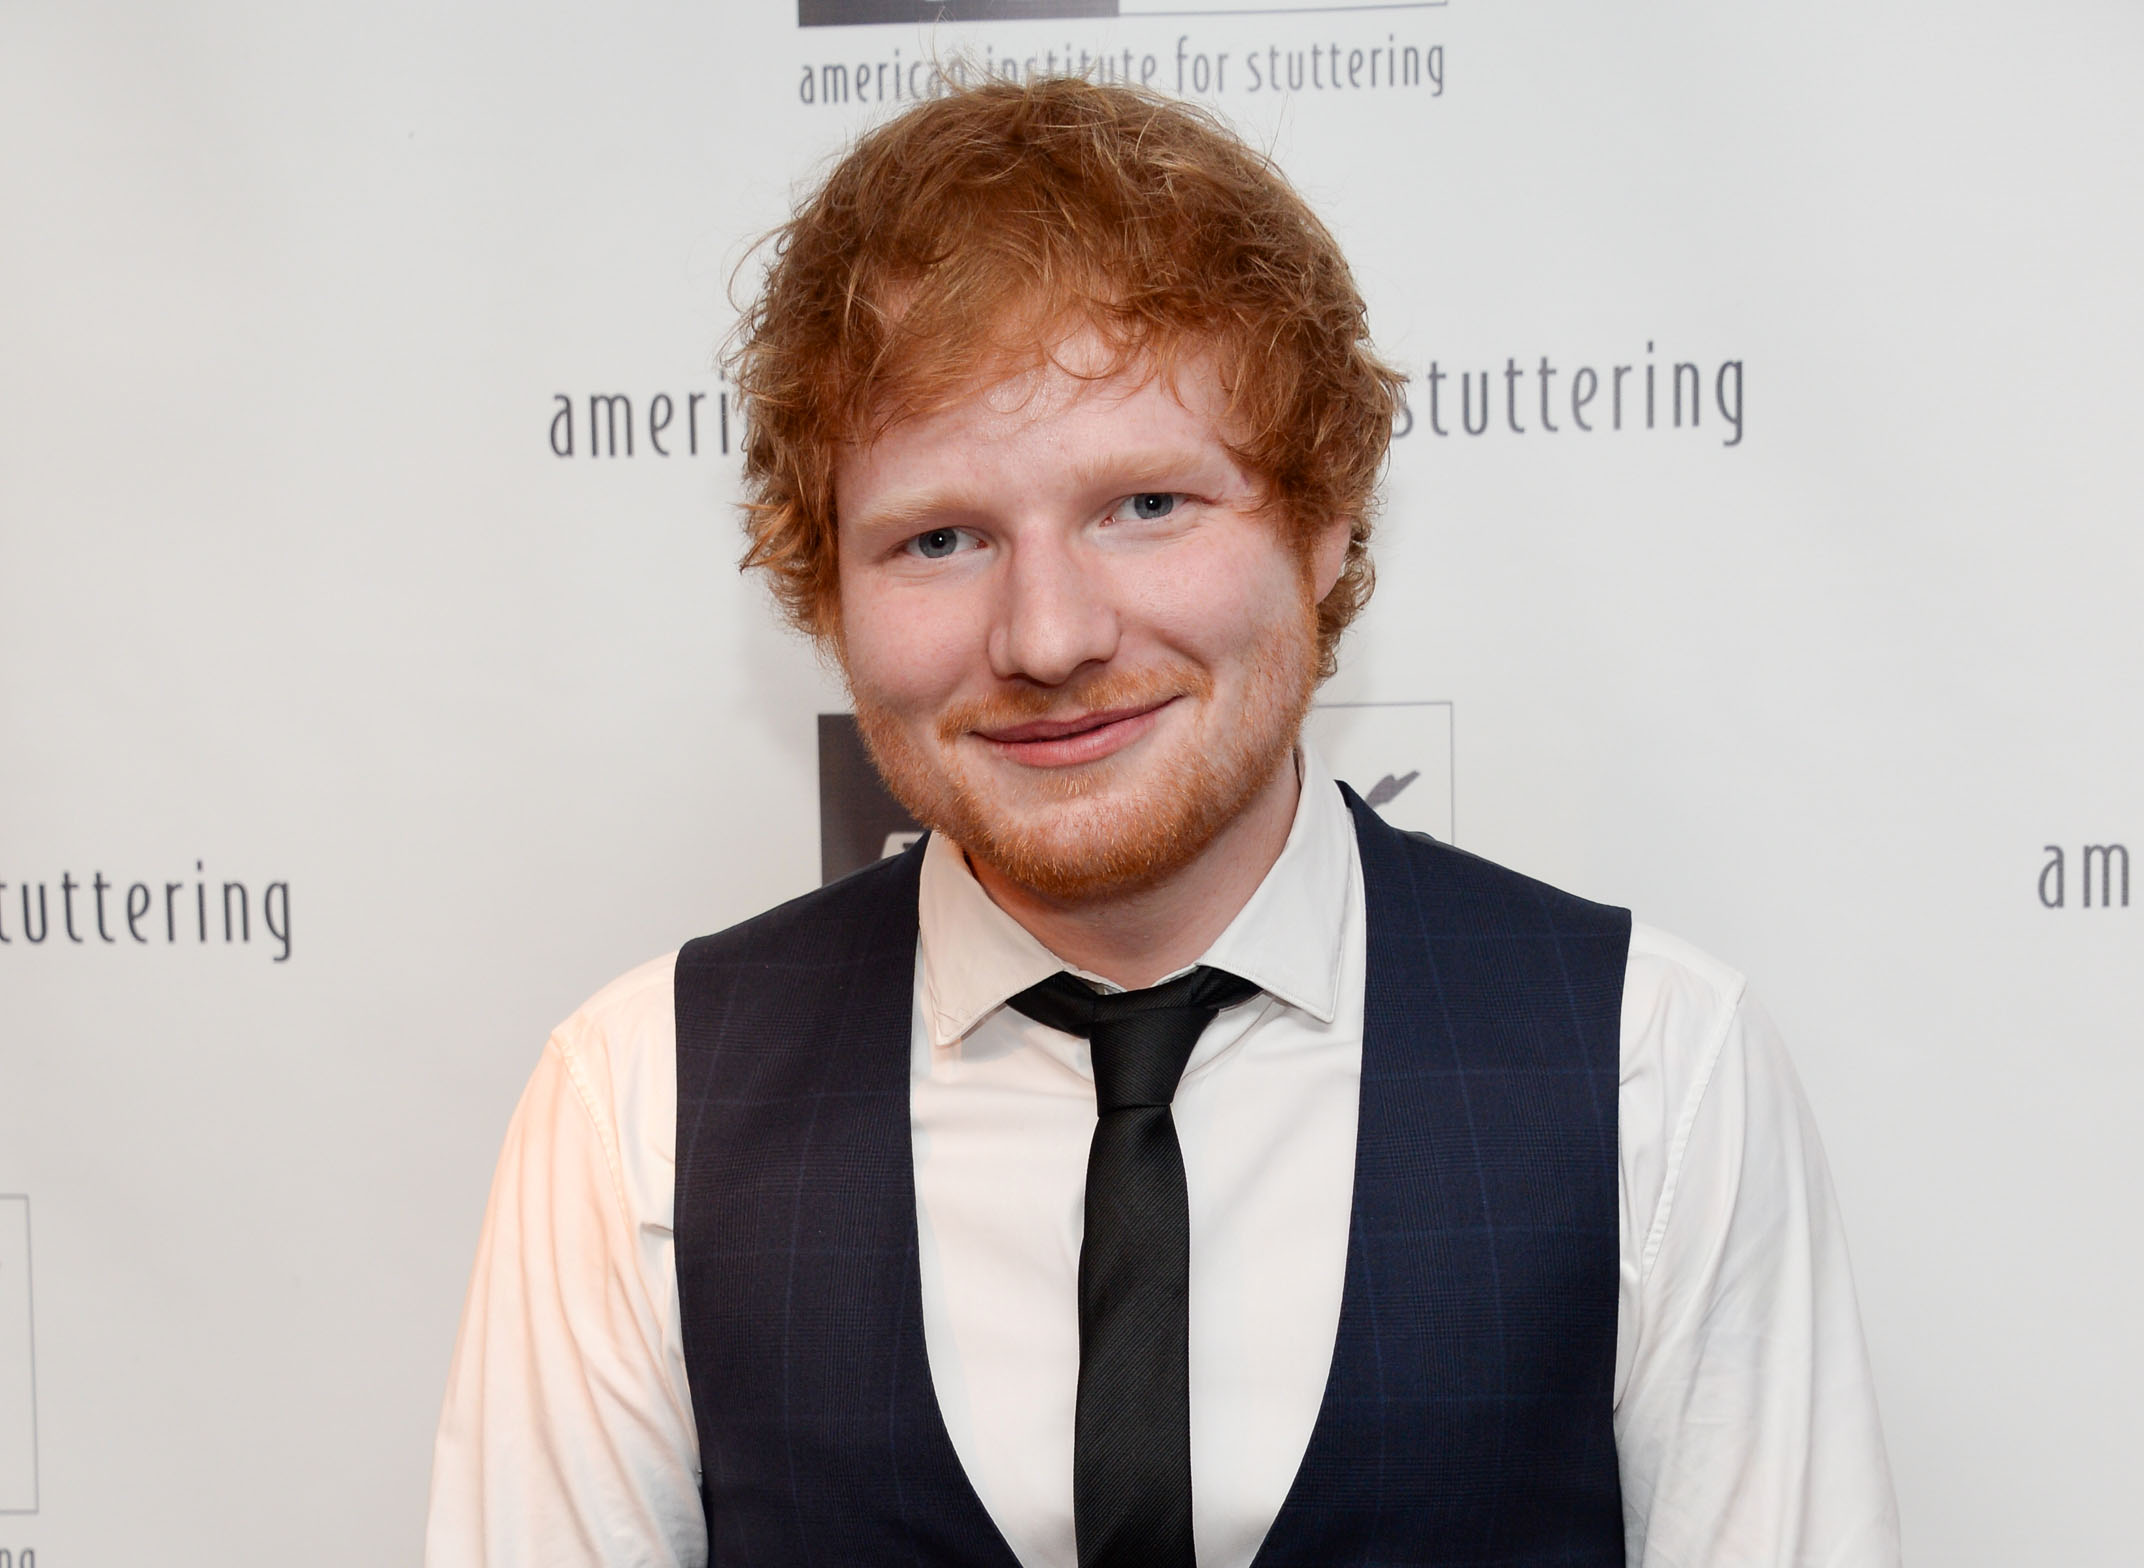 FILE - In this June 8, 2015 file photo, musician Ed Sheeran attends the American Institute for Stuttering's 9th Annual Freeing Voices Changing Lives Gala in New York. Sheeran topped Spotify’s list of the top 25 most influential artists under the age of 25 as the company’s most streamed artist of 2014. The music streaming service released their list on Tuesday, Aug. 18, 2015, which had Ariana Grande, Sam Smith, Miley Cyrus and One Direction rounding out the top five young artists.  (Photo by Evan Agostini/Invision/AP, File)